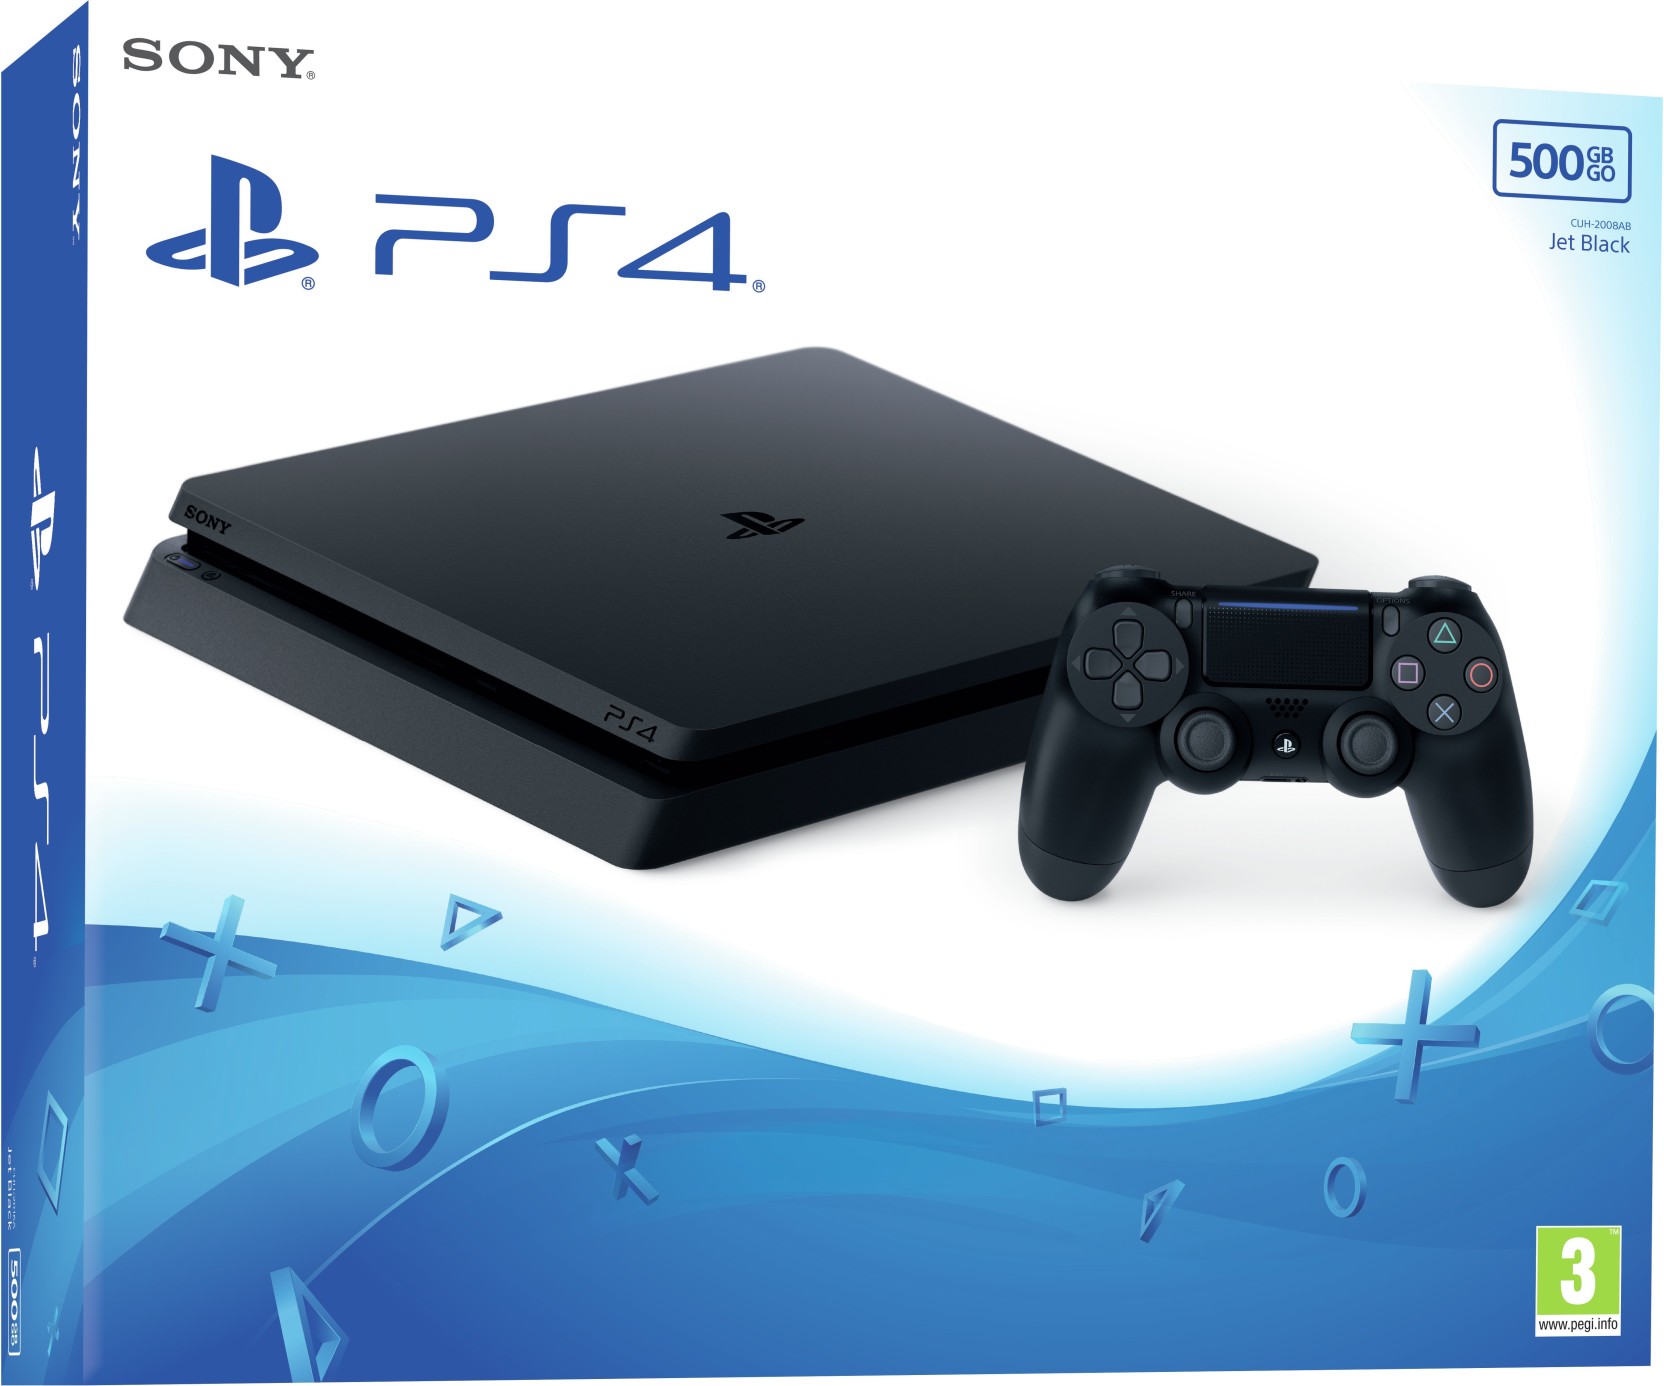 Sony PlayStation 4 (PS4) Slim 500 GB Price in India - Buy Sony